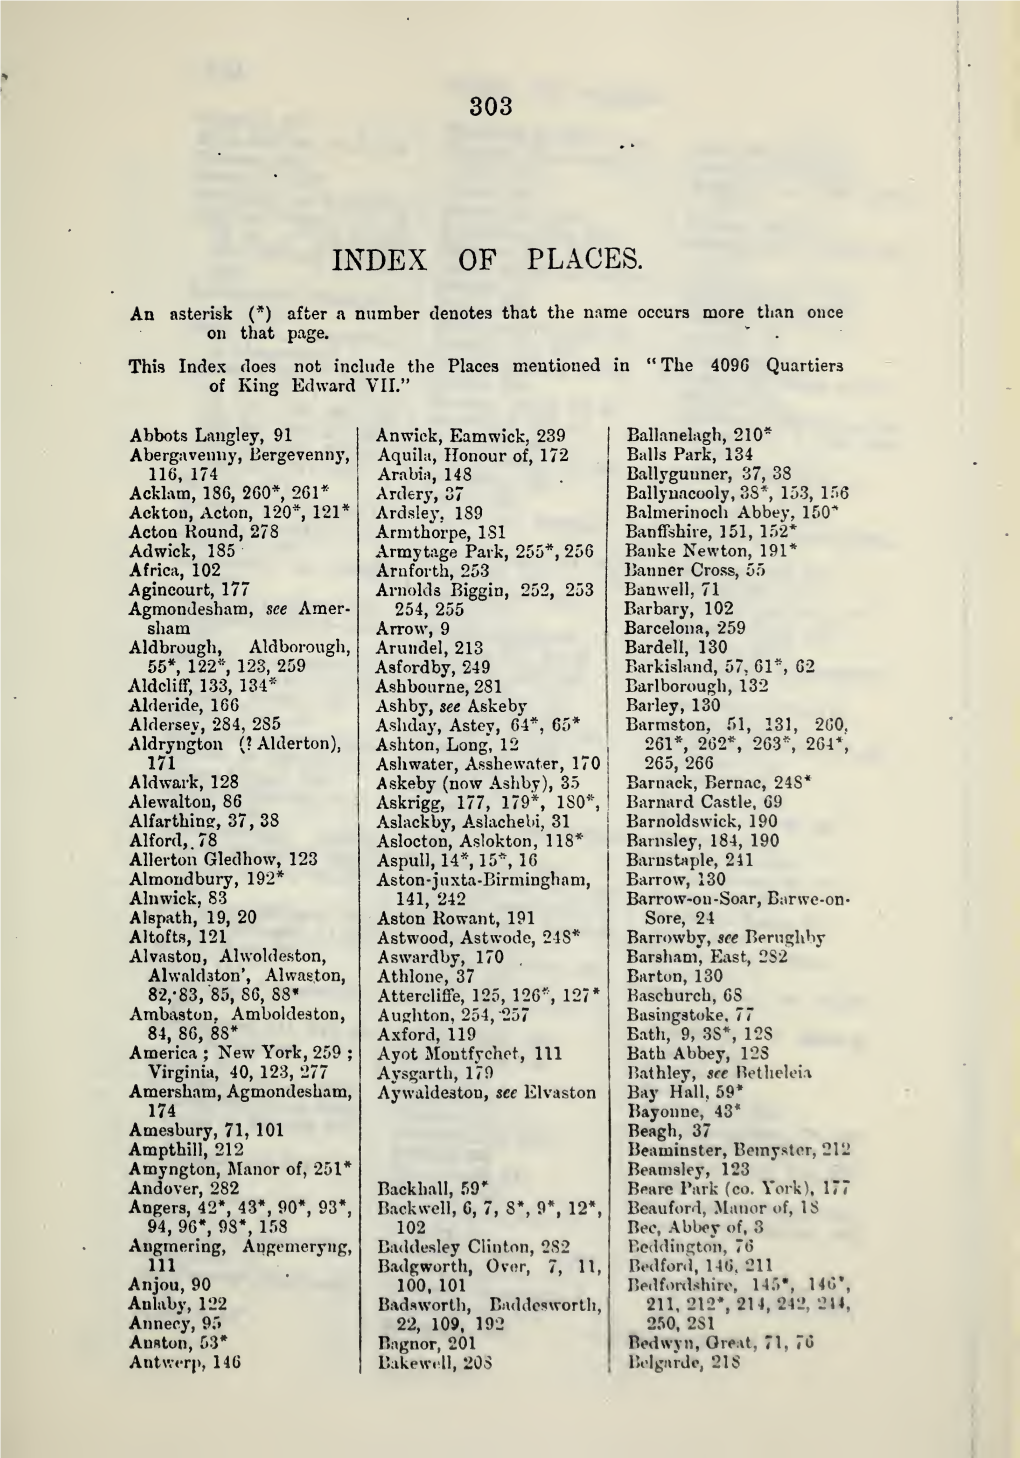 Index of Places